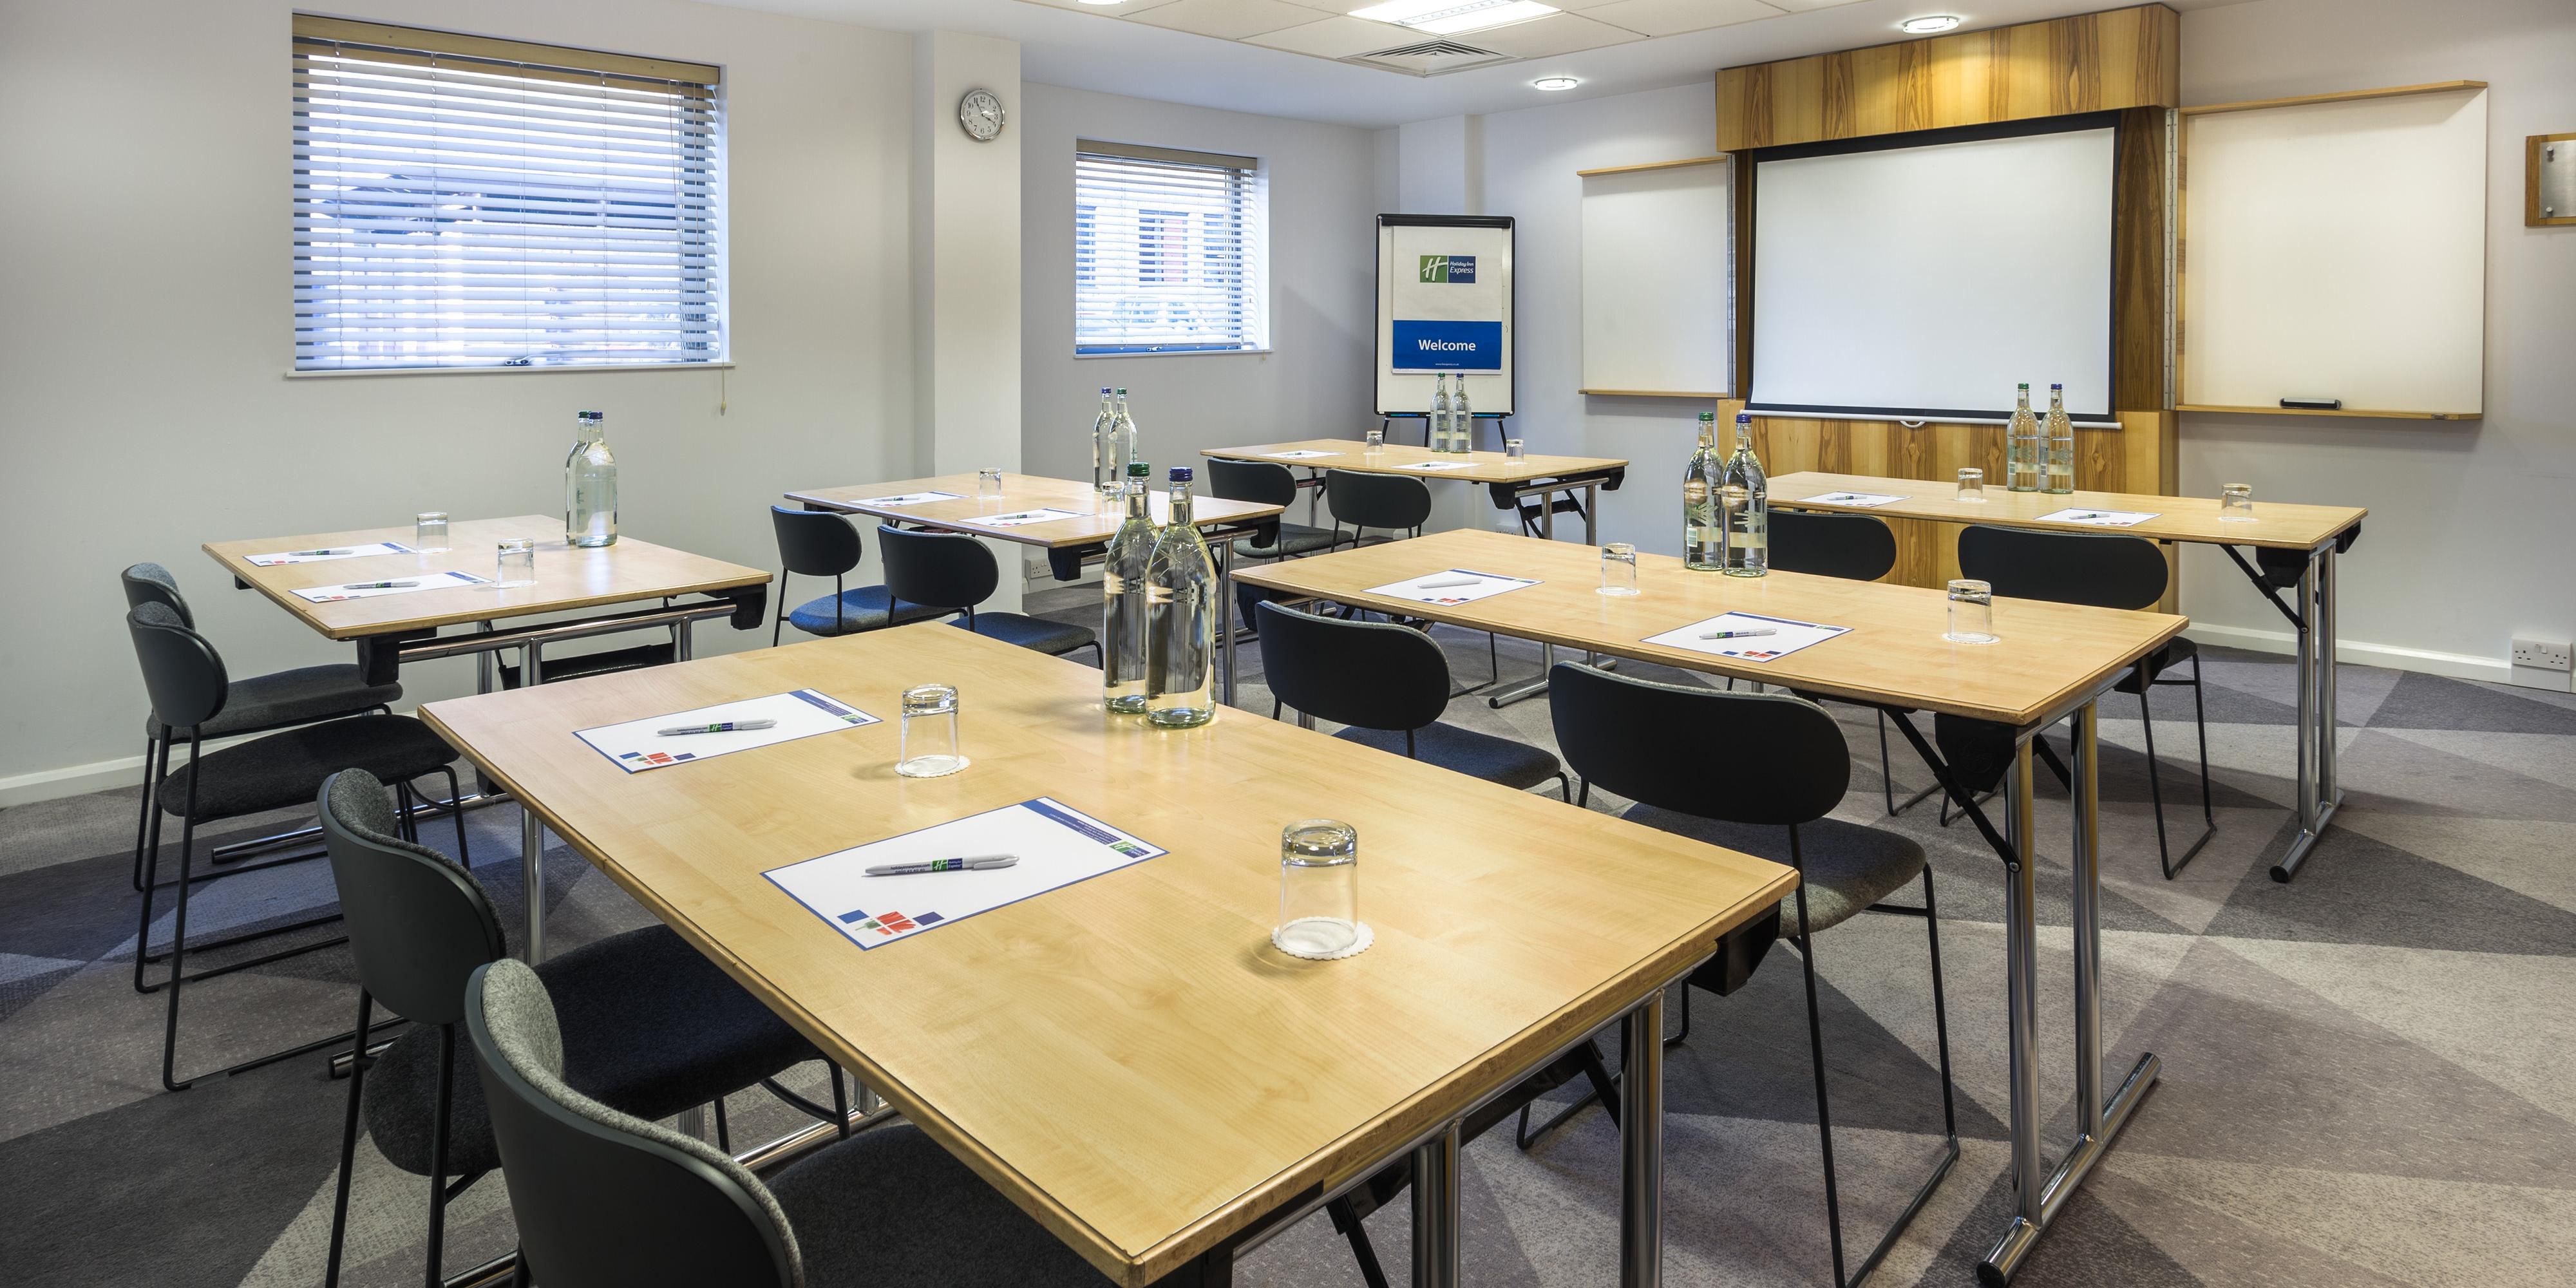 2 comfortable meeting rooms and a great range of in-room facilities.
Perfect for meetings, training sessions, or presentations
• With capacities of 20 to 30 people - perfect for the smaller meeting
Day Delegate Package includes: 
• Full day room hire
• Unlimited tea and coffee with biscuits and bottled water in the room
• Sandwich buffet lunch